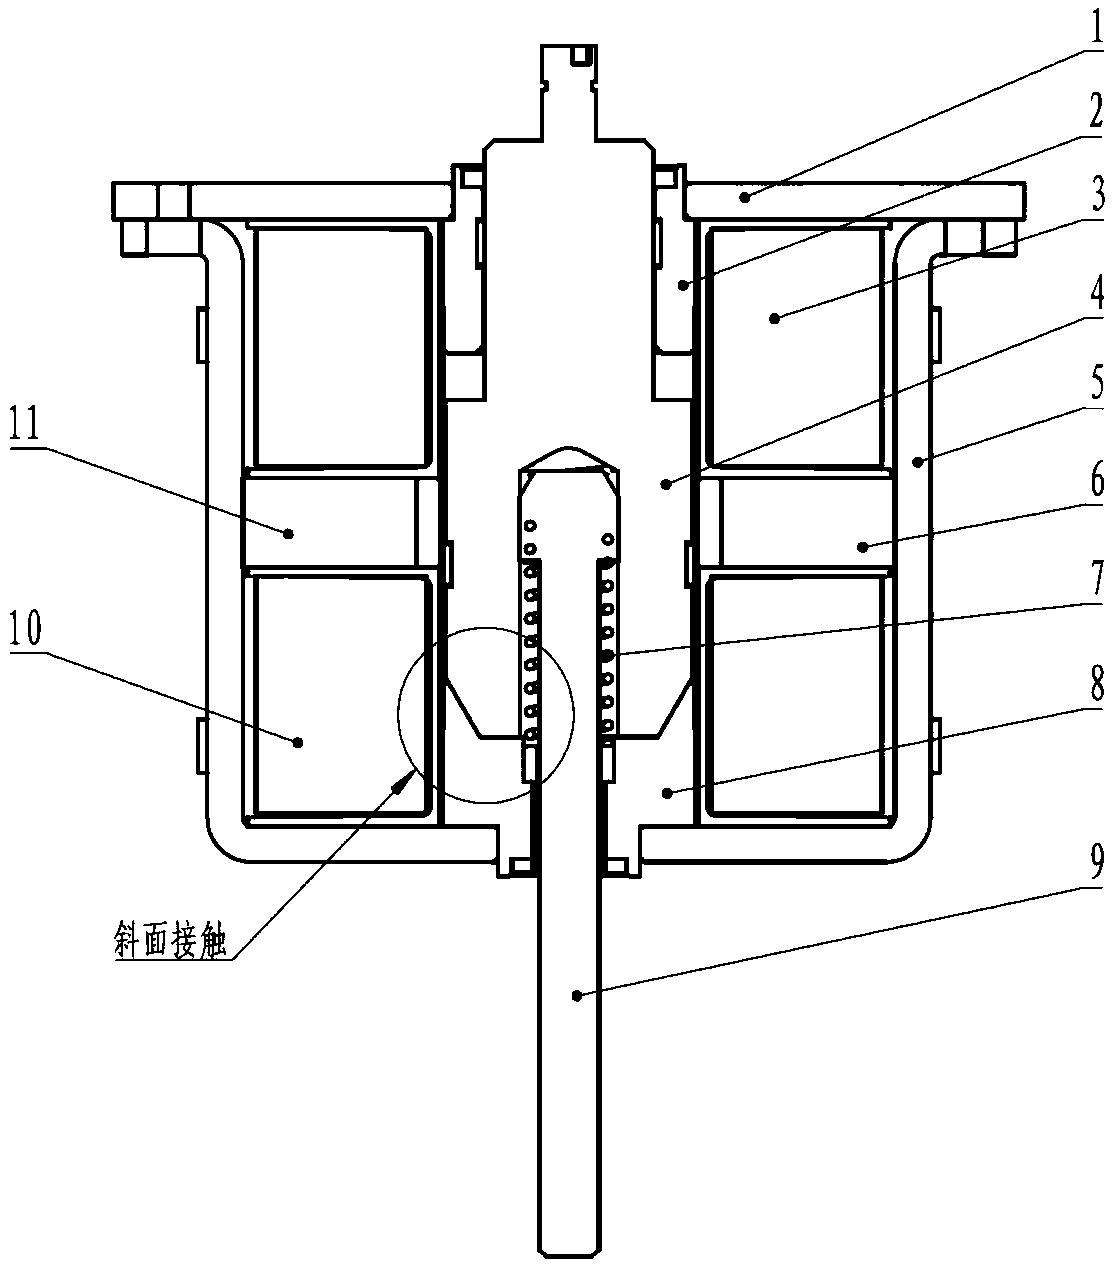 Middle-arranged magnetic steel magnetic circuit structure with inclined surface contact